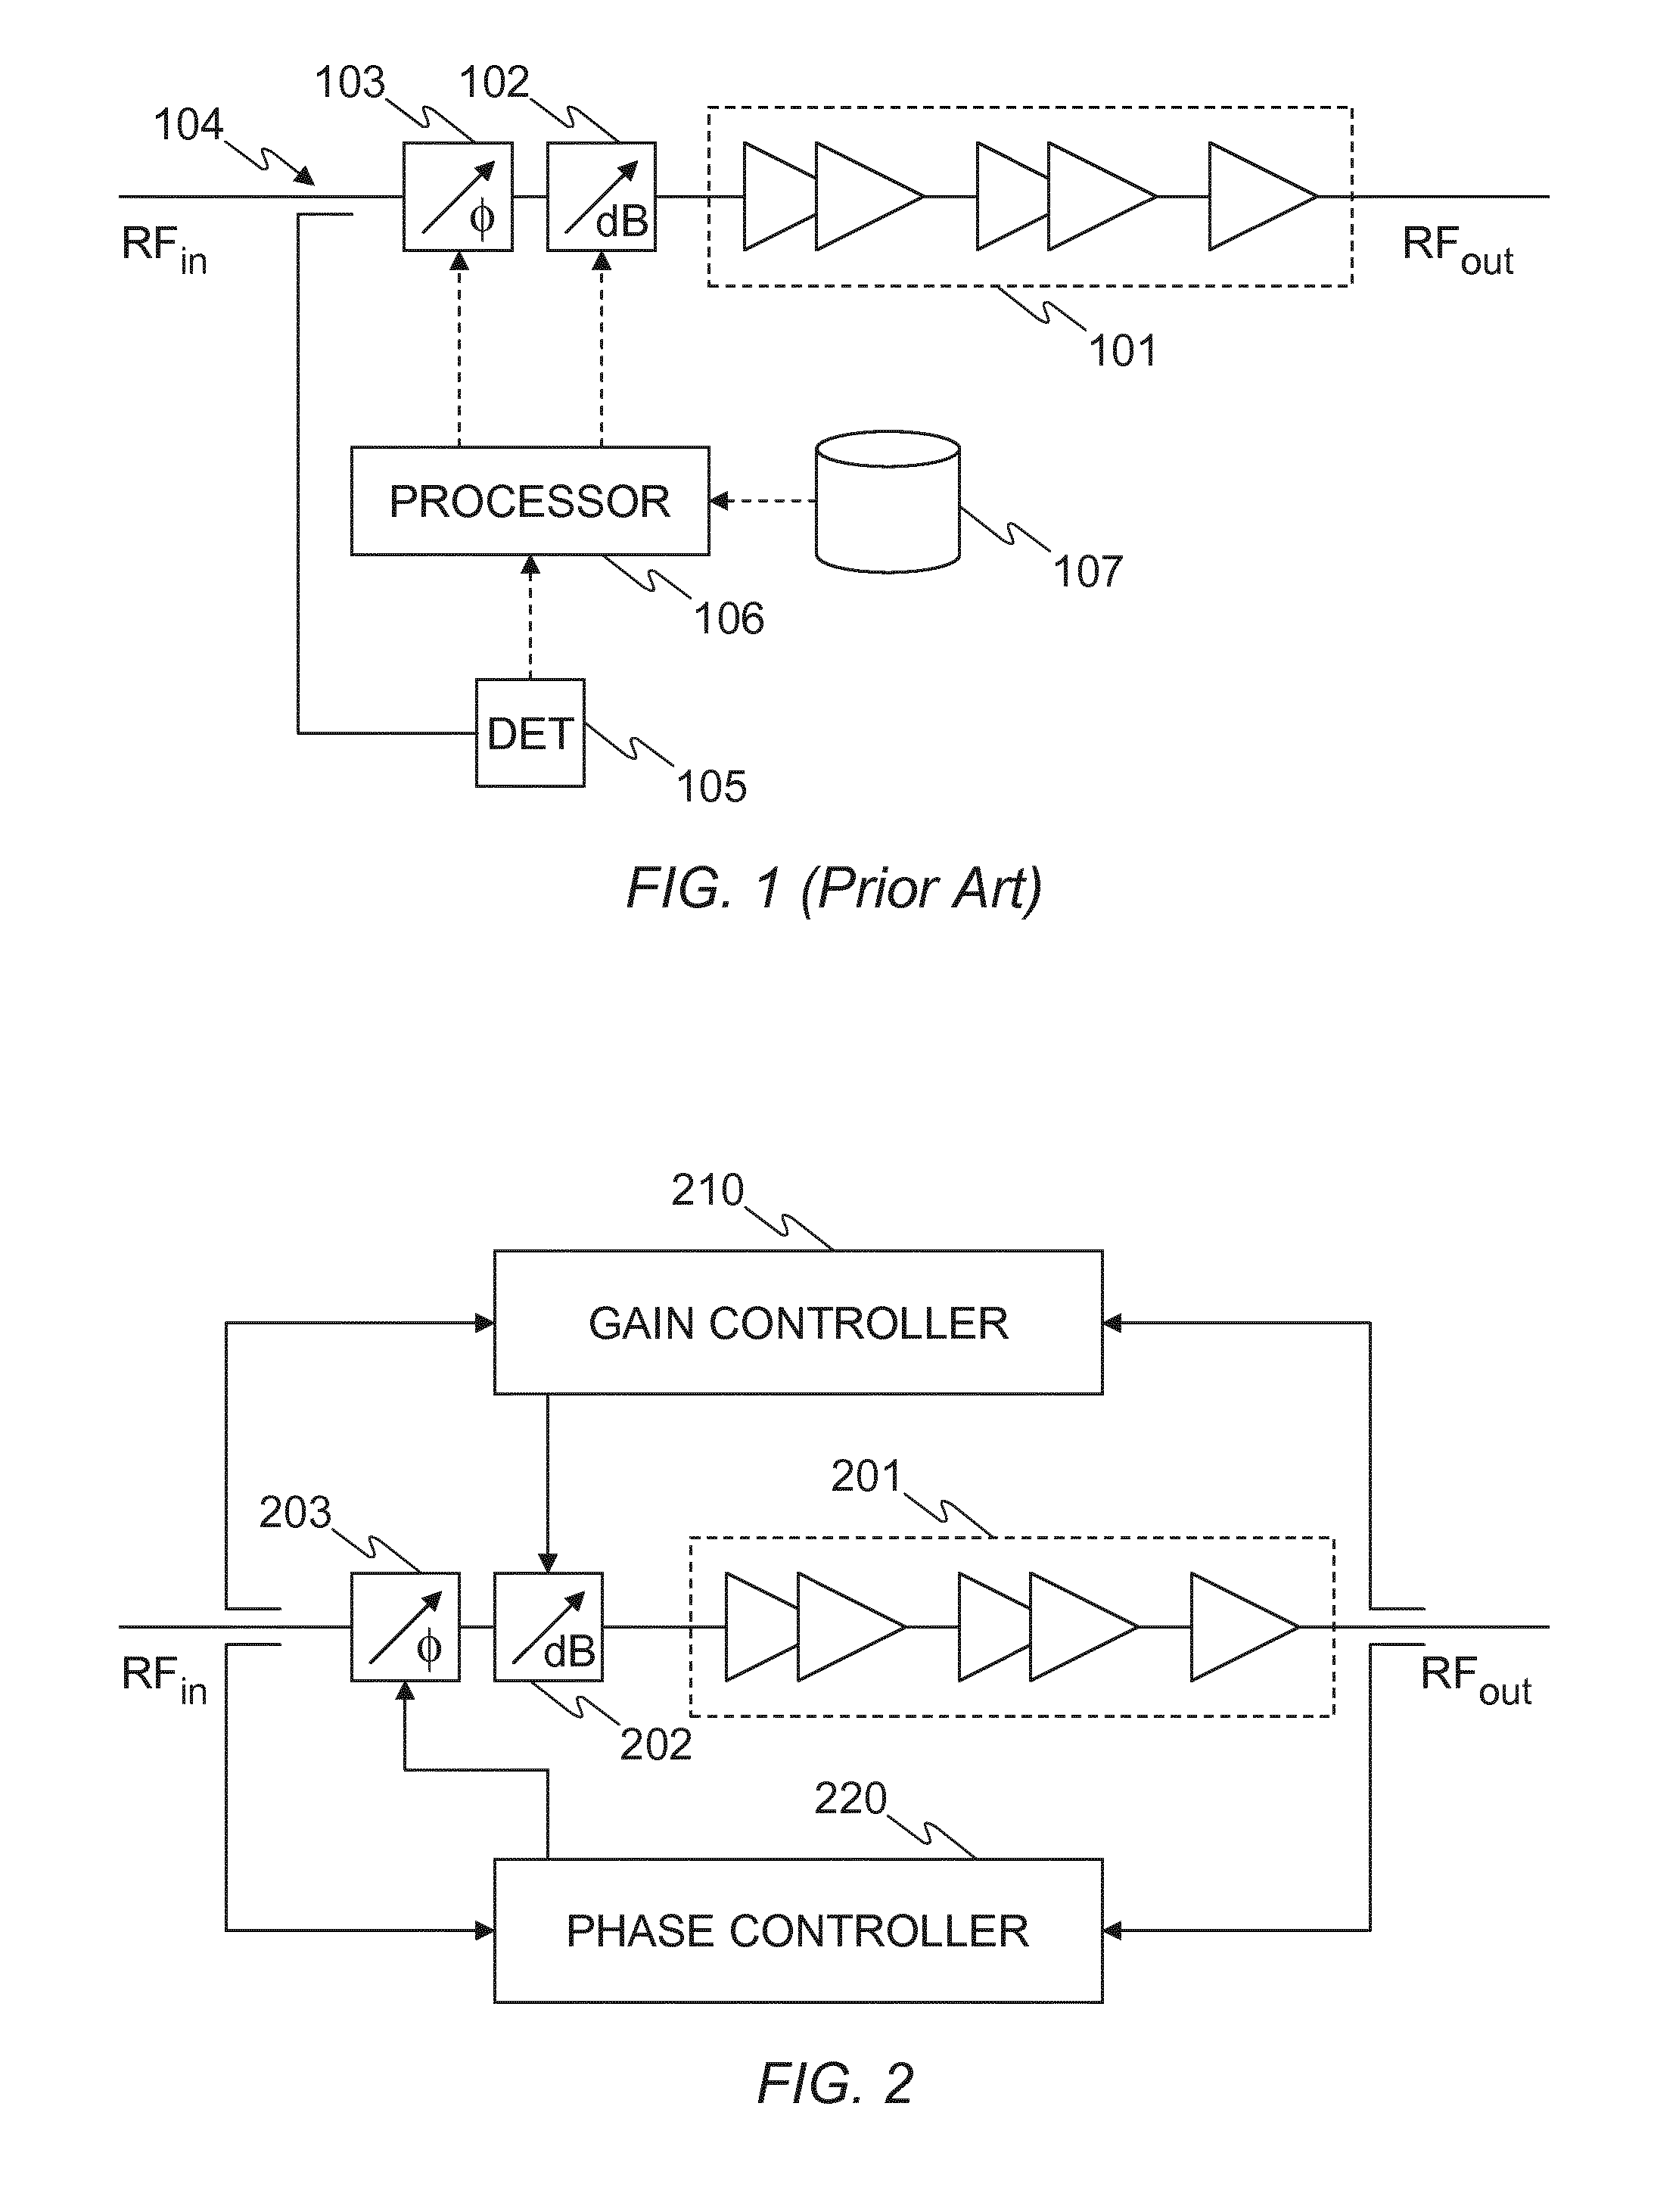 Control system for a power amplifier